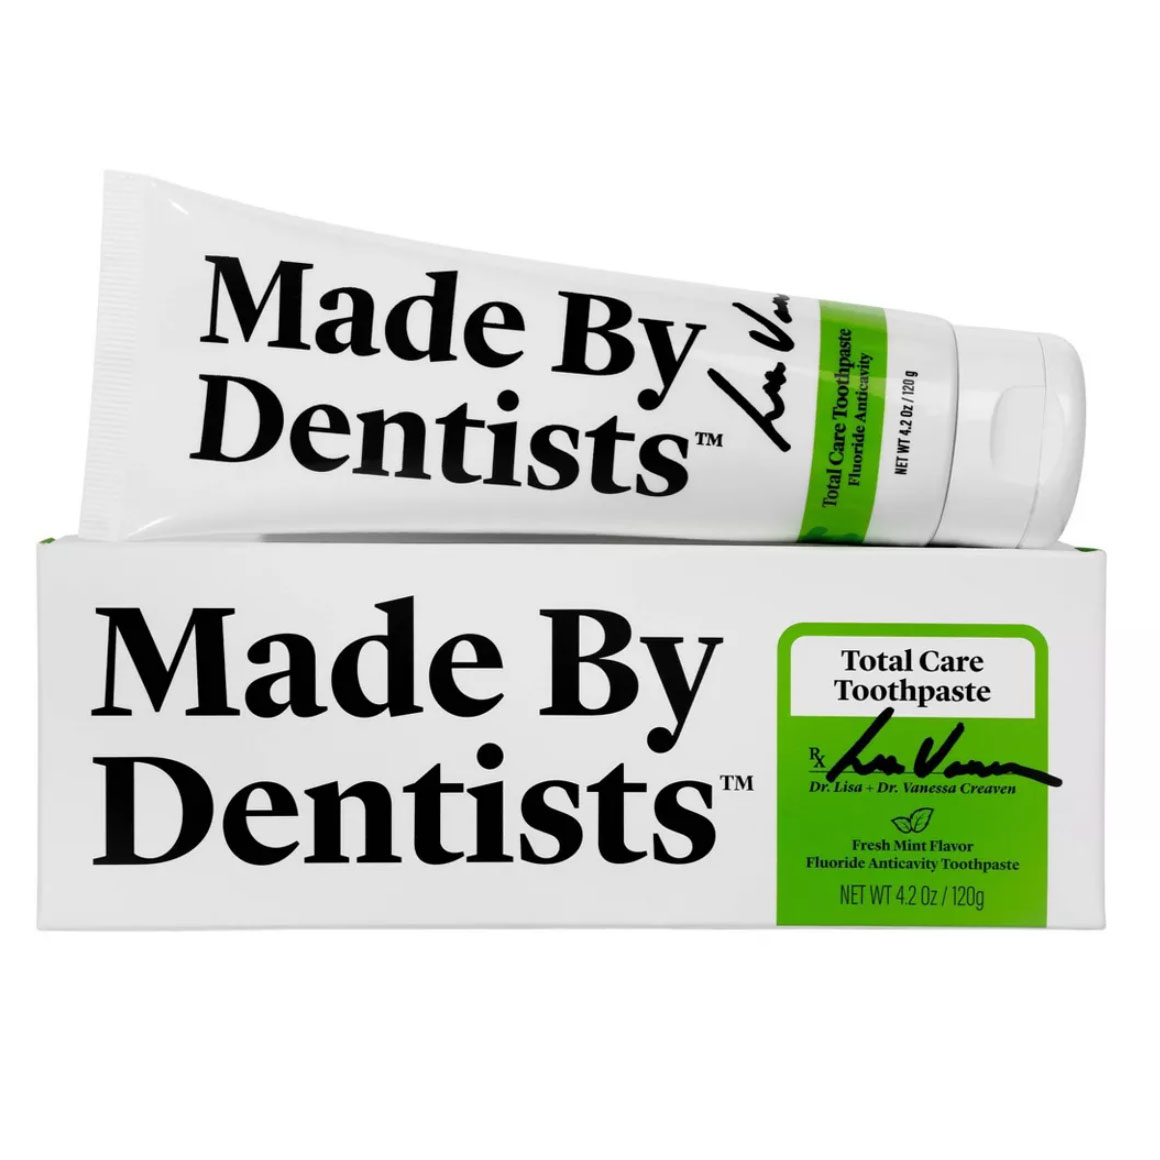 Made by Dentists Total Care Toothpaste